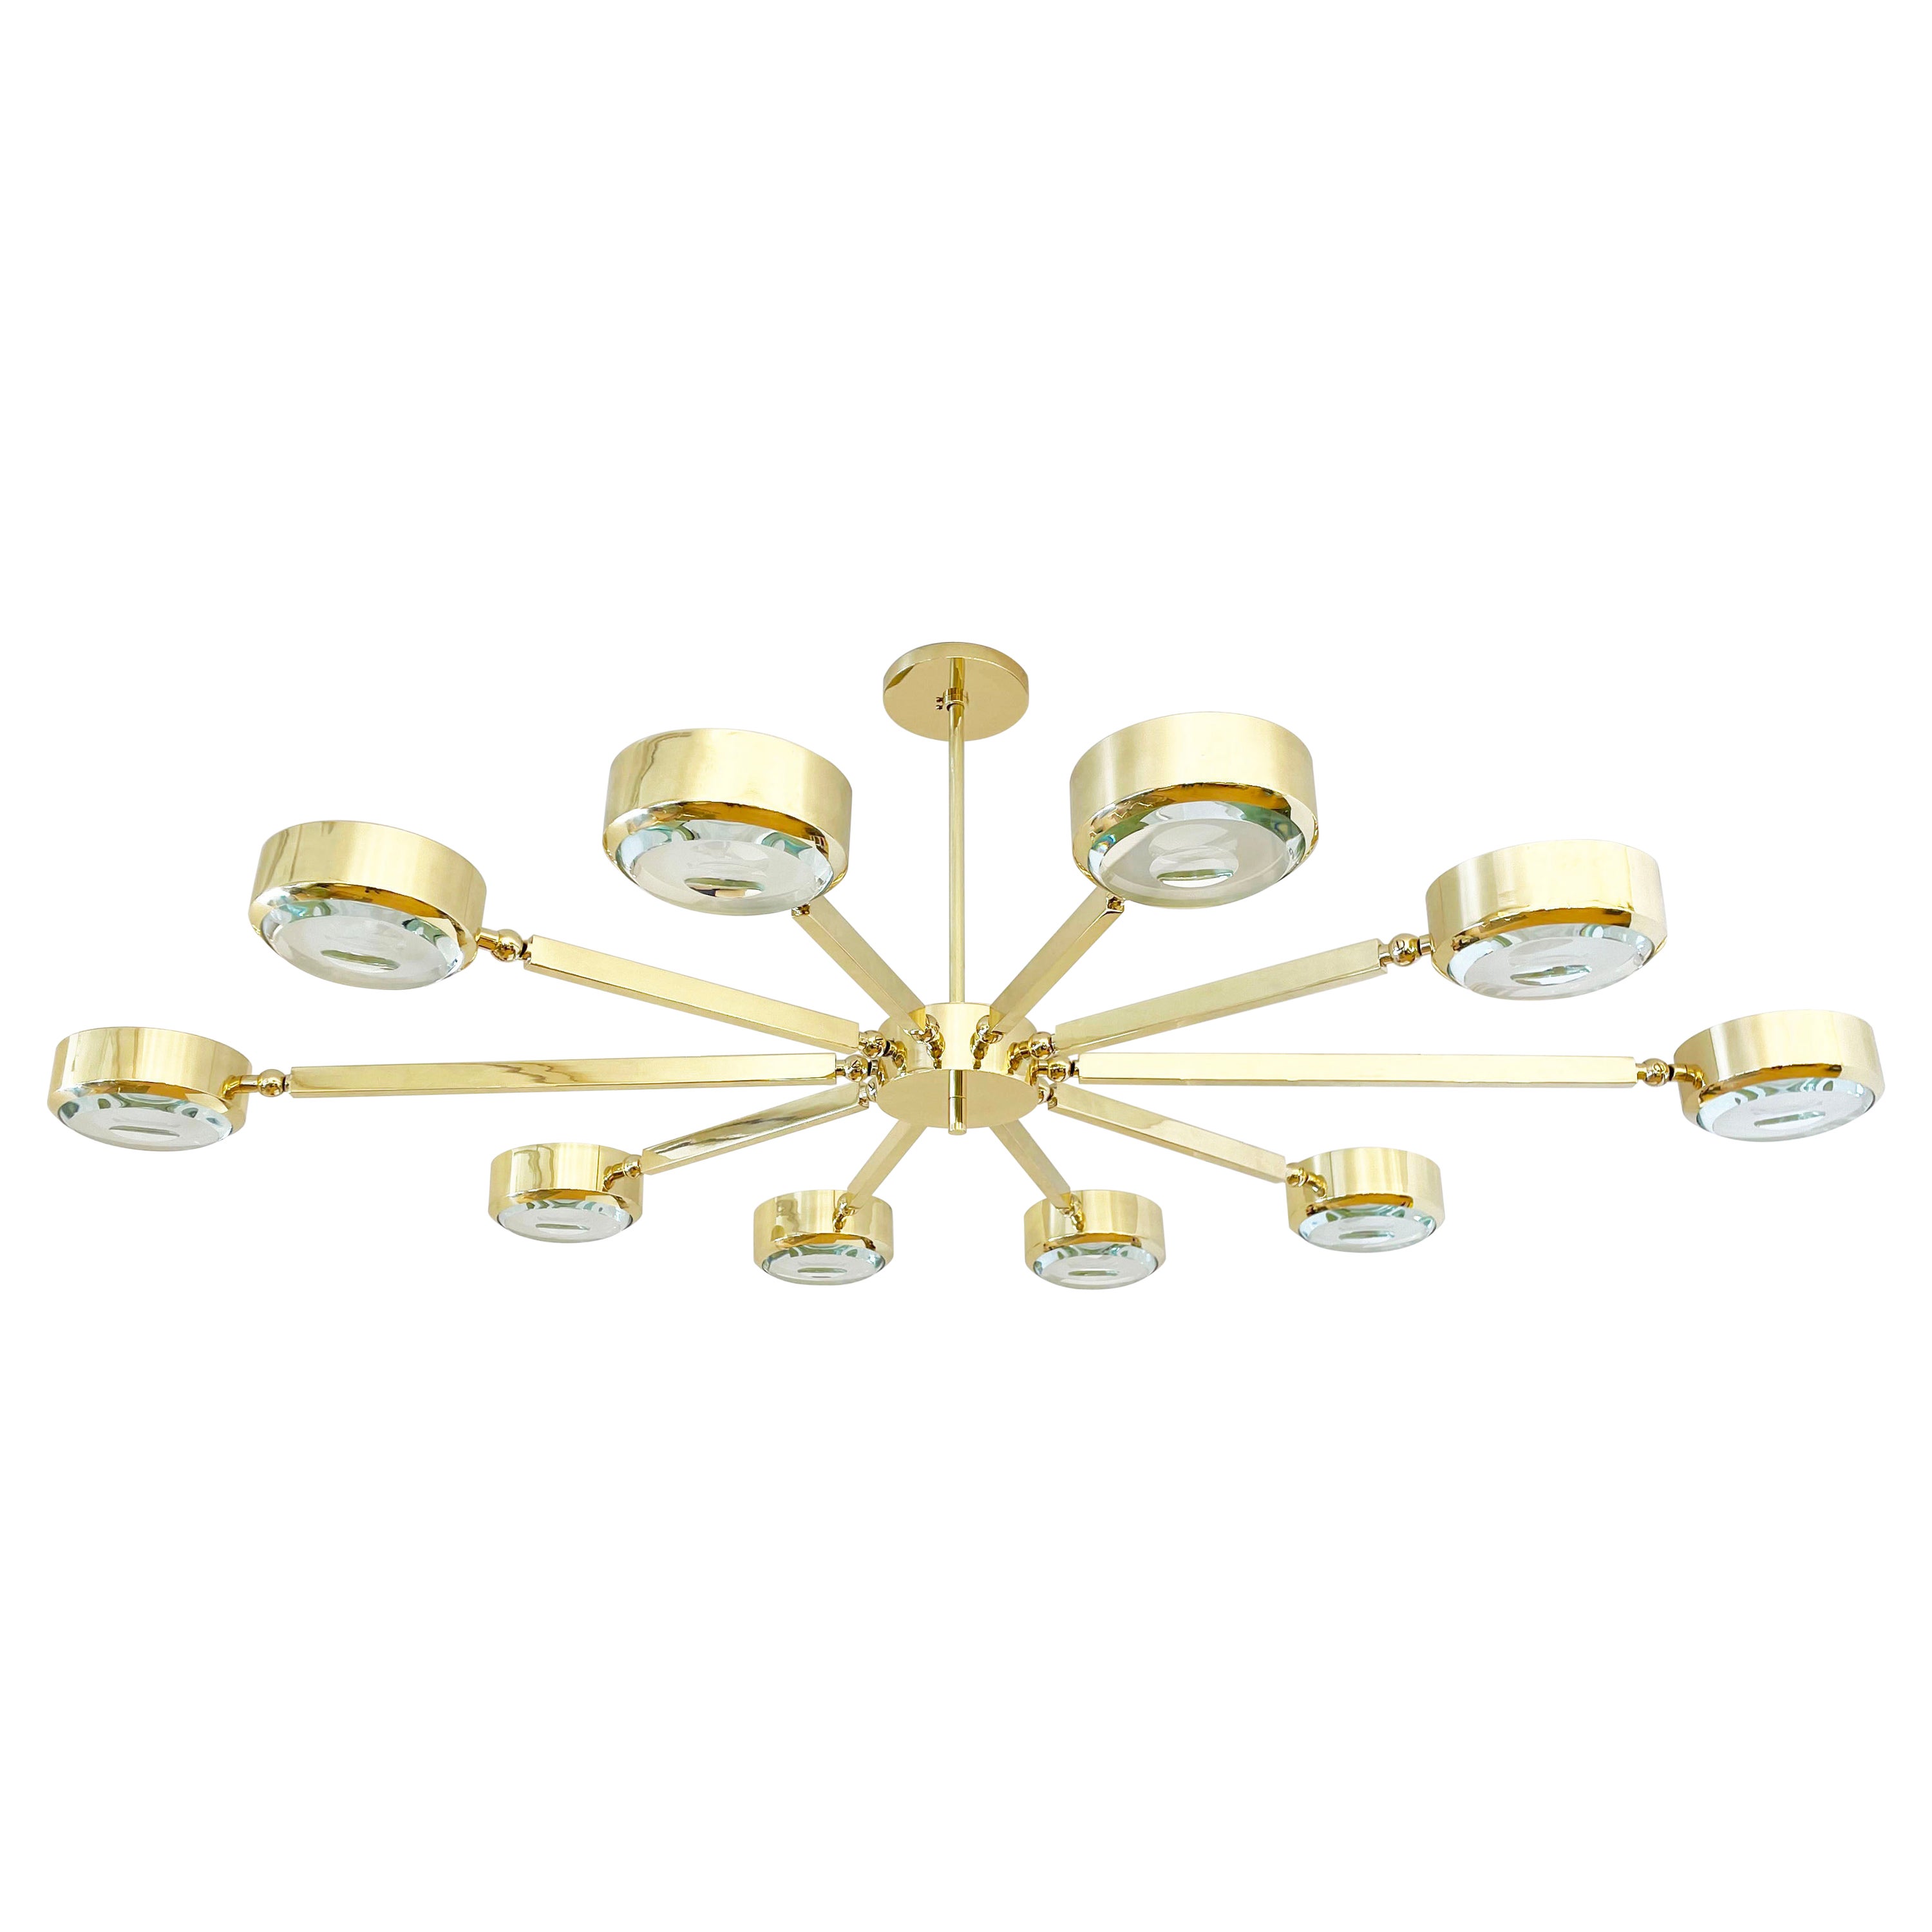 Oculus Oval Ceiling Light by Gaspare Asaro- Polished Nickel with Carved Glass In New Condition For Sale In New York, NY